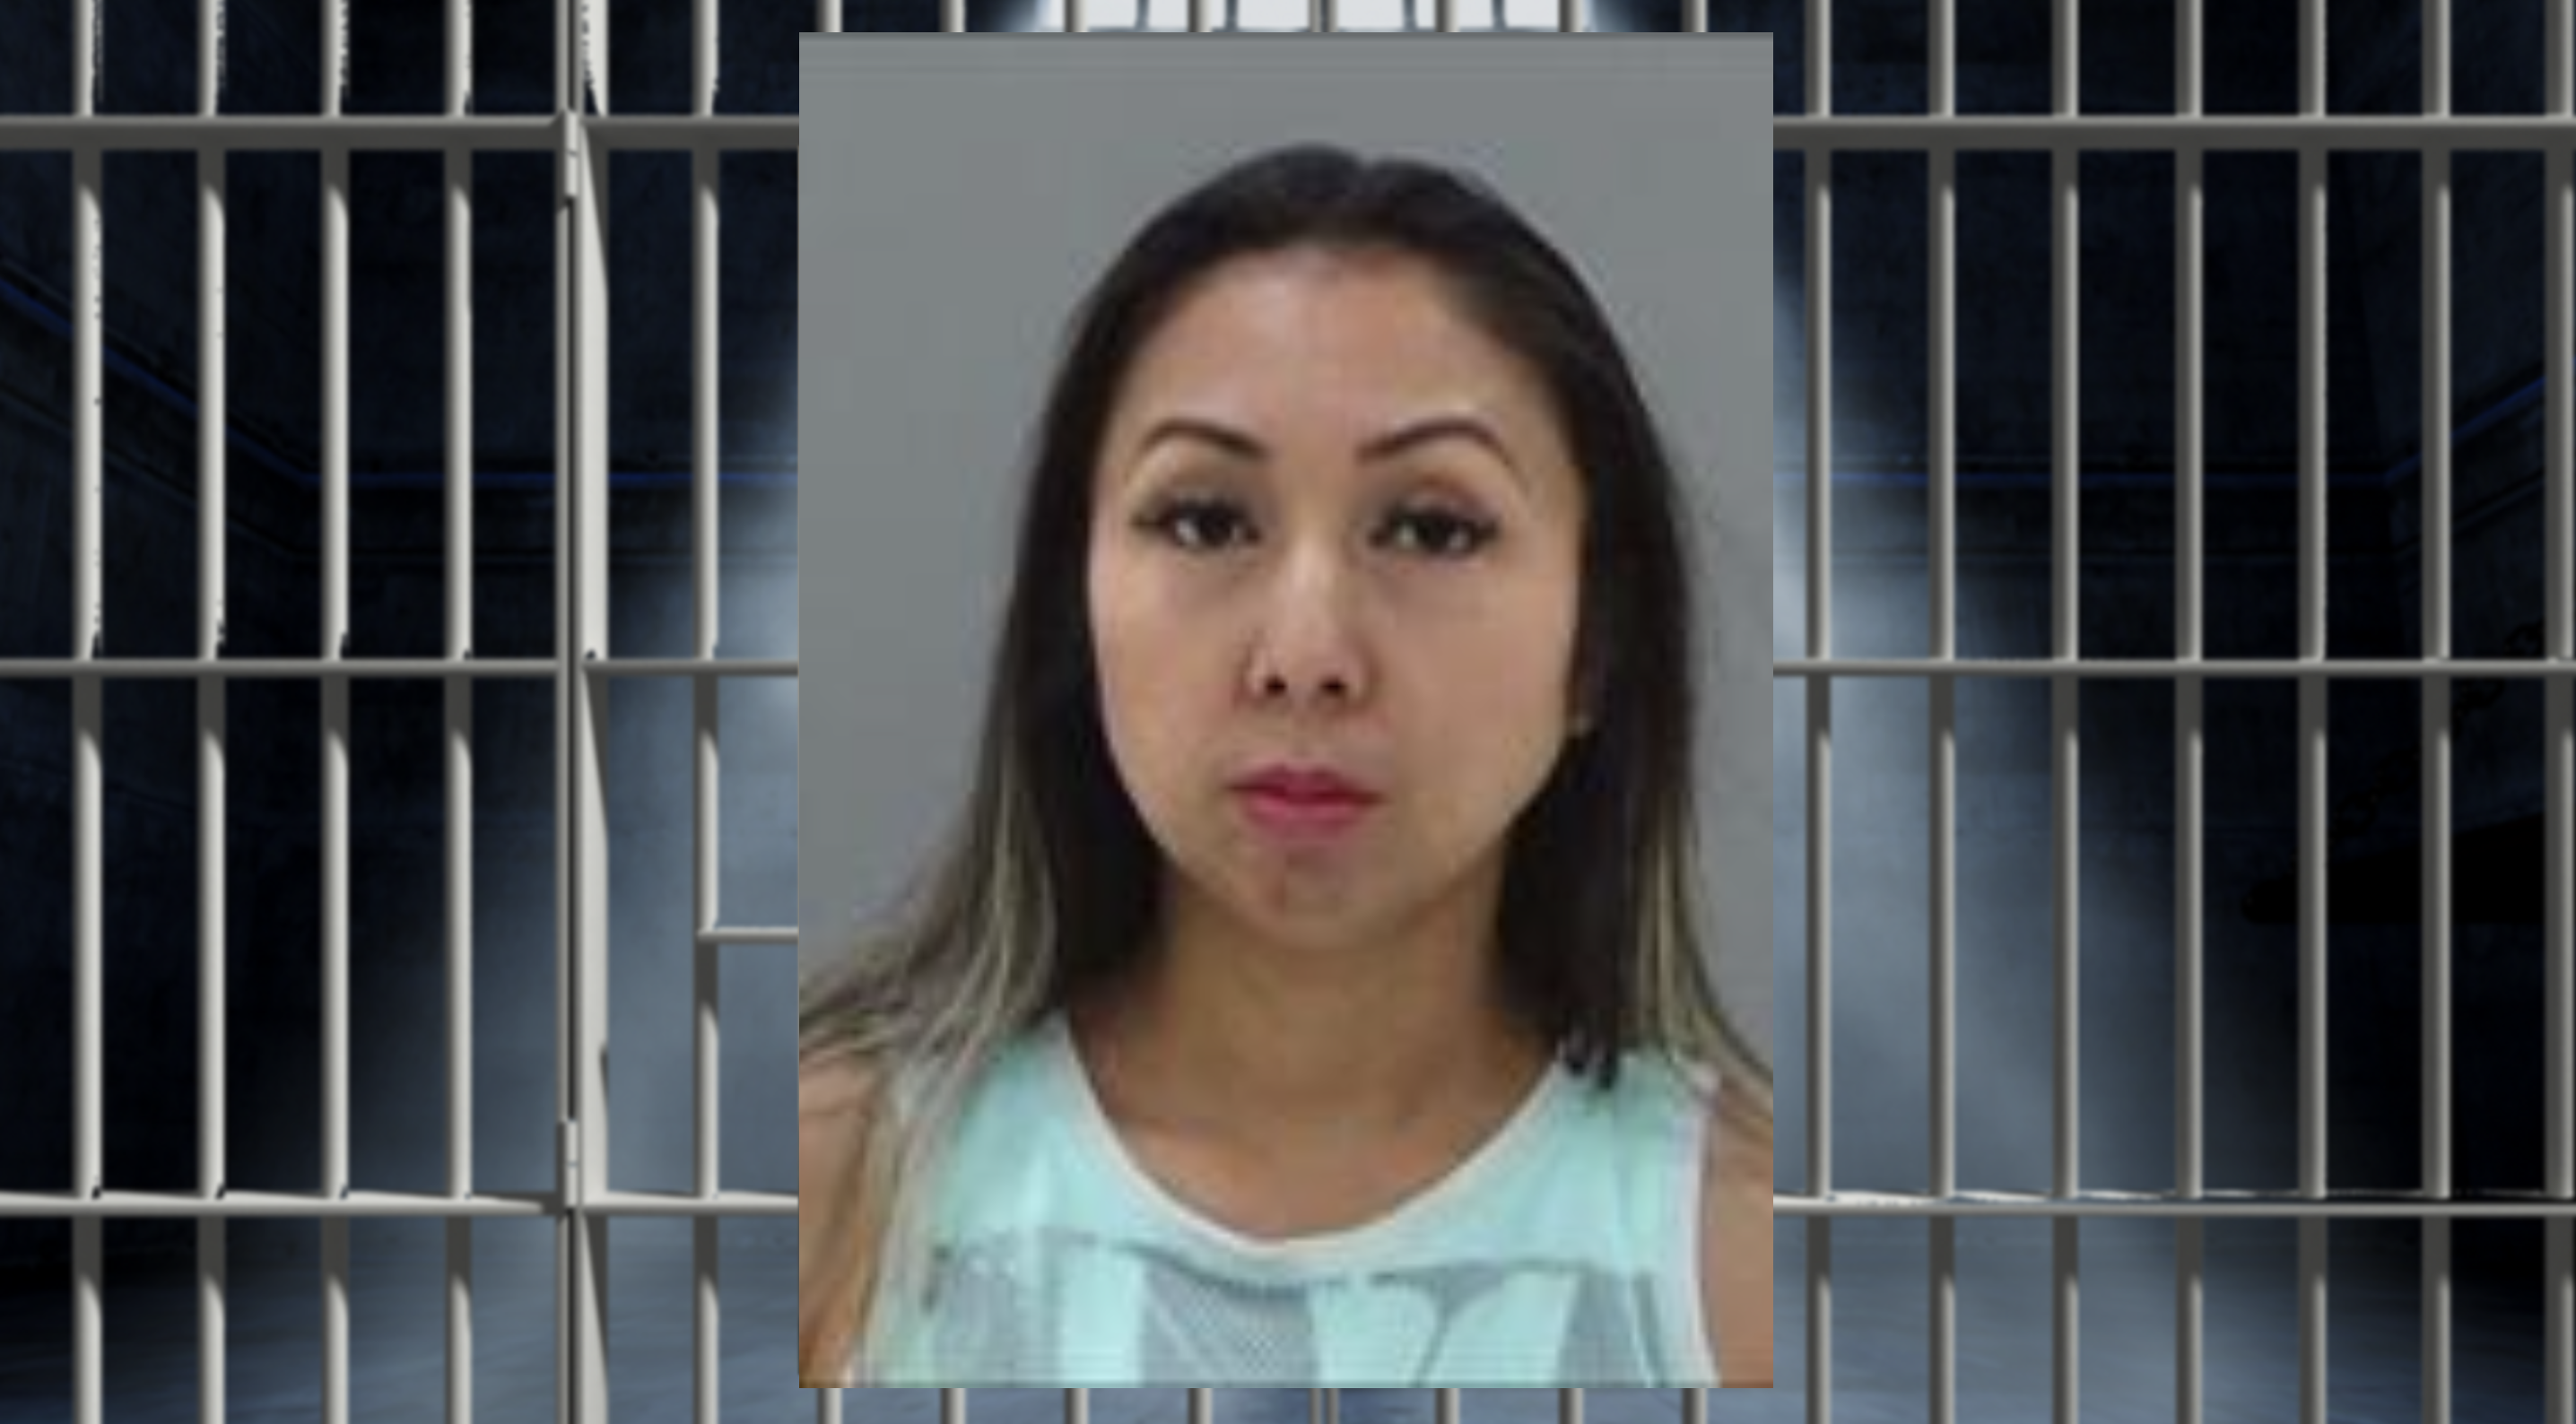 San Angelo Woman Arrested for Alleged Tryst with Juvenile